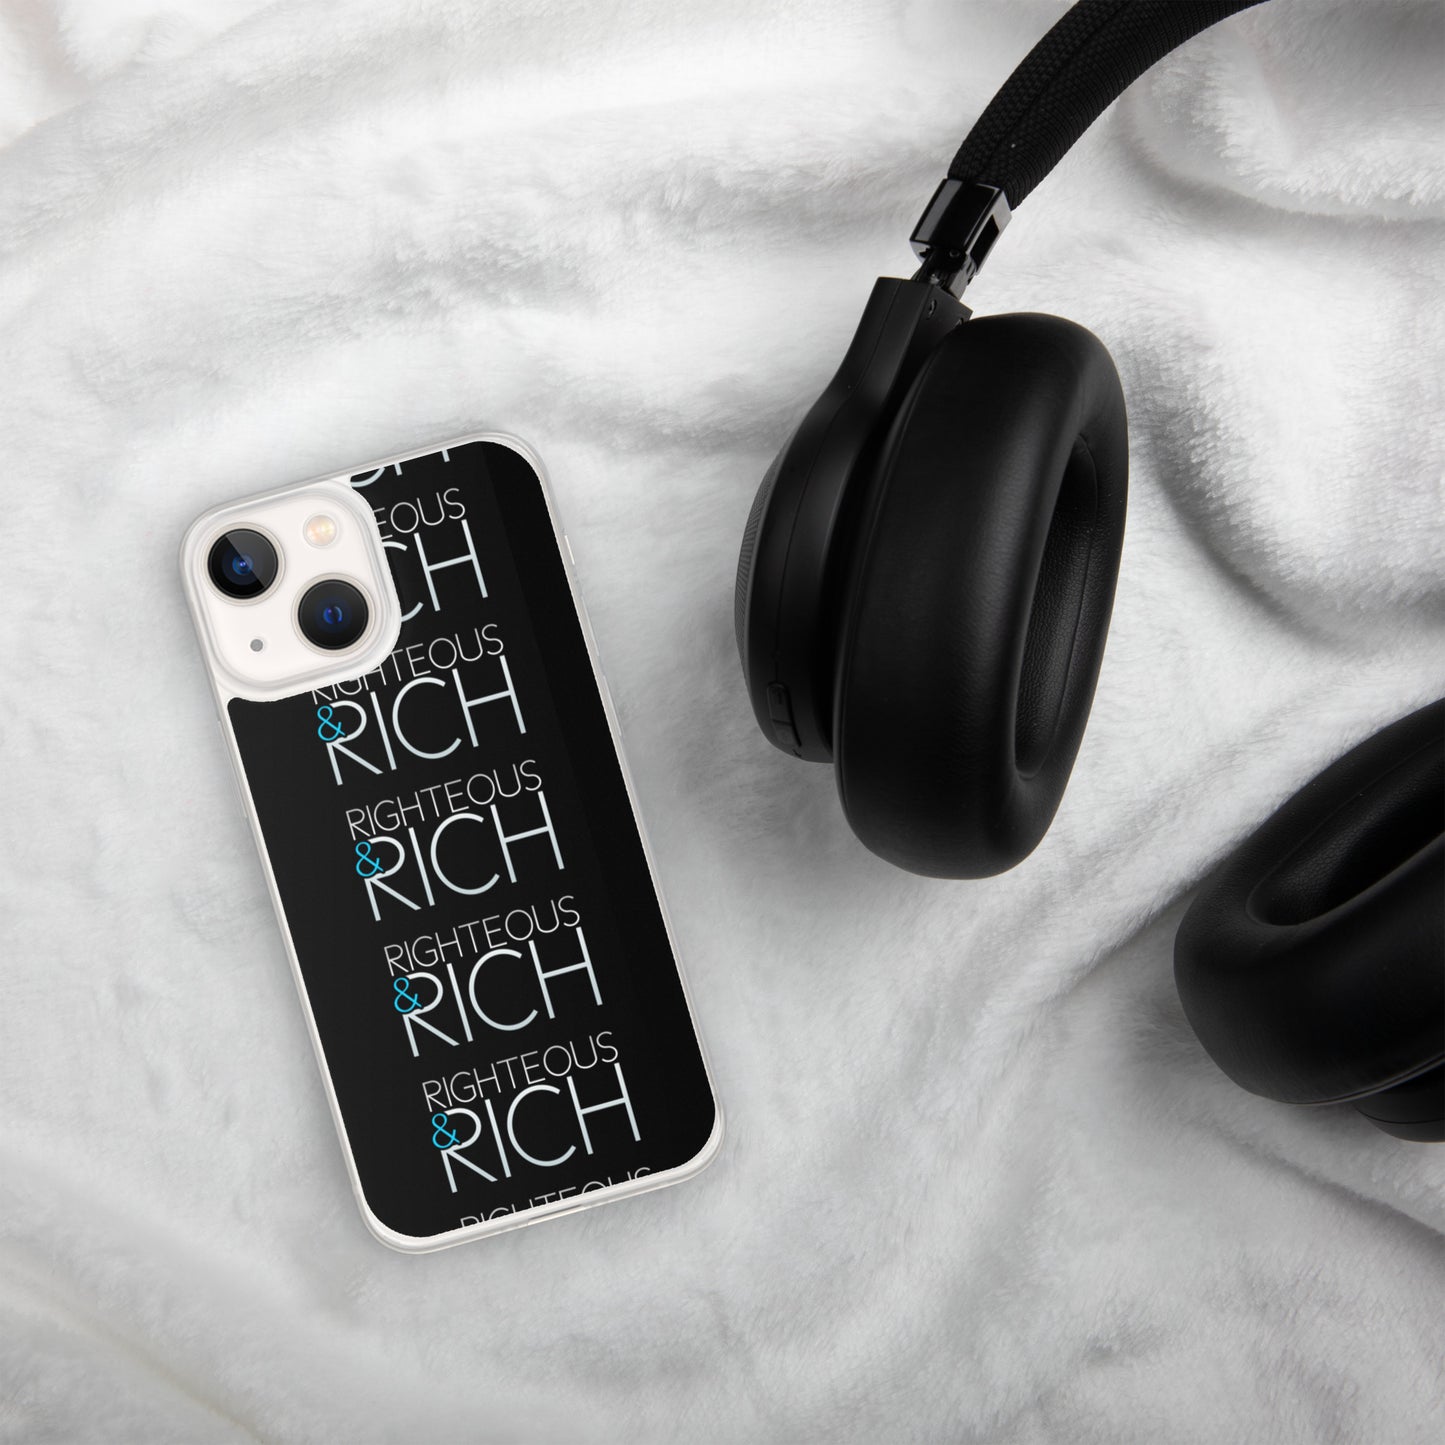 Righteous & Rich IPhone Case